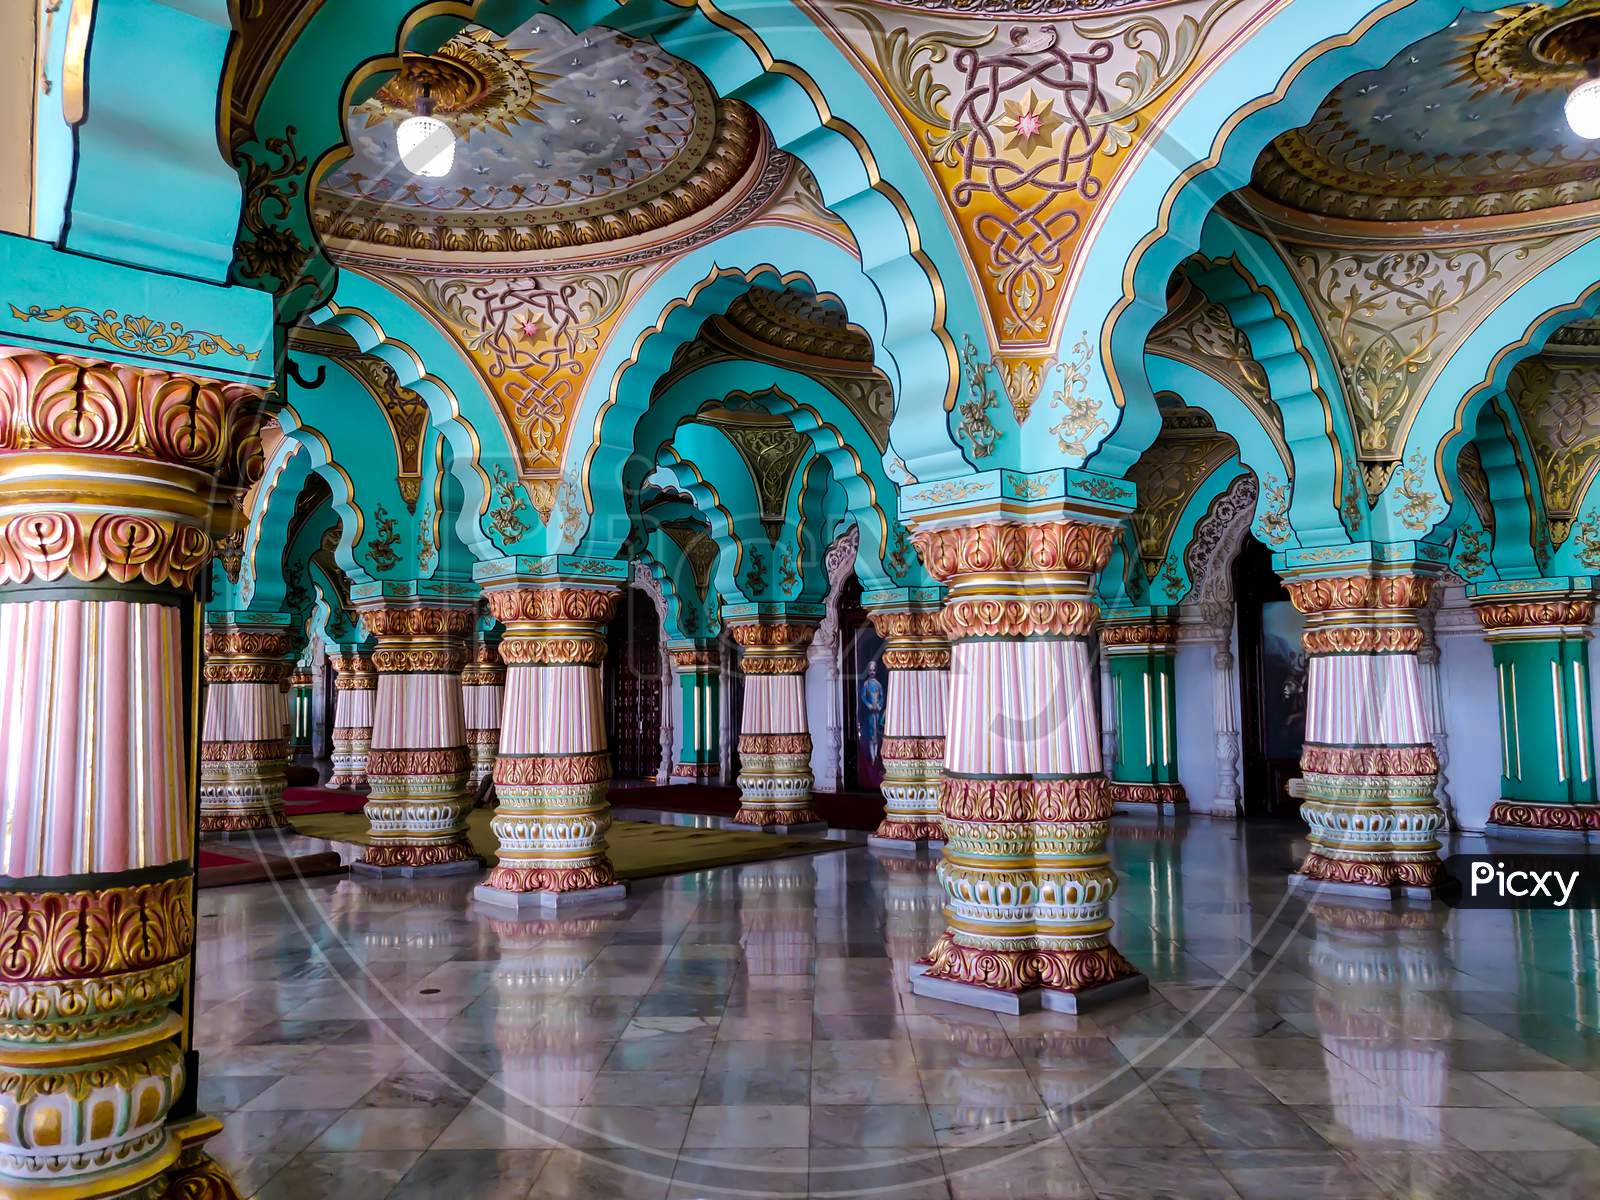 September 8, 2019- Mysore, India:Beautiful Decorated Interior Ceiling And Pillars Of The Durbar Or Audience Hall Inside The Royal Mysore Palace.